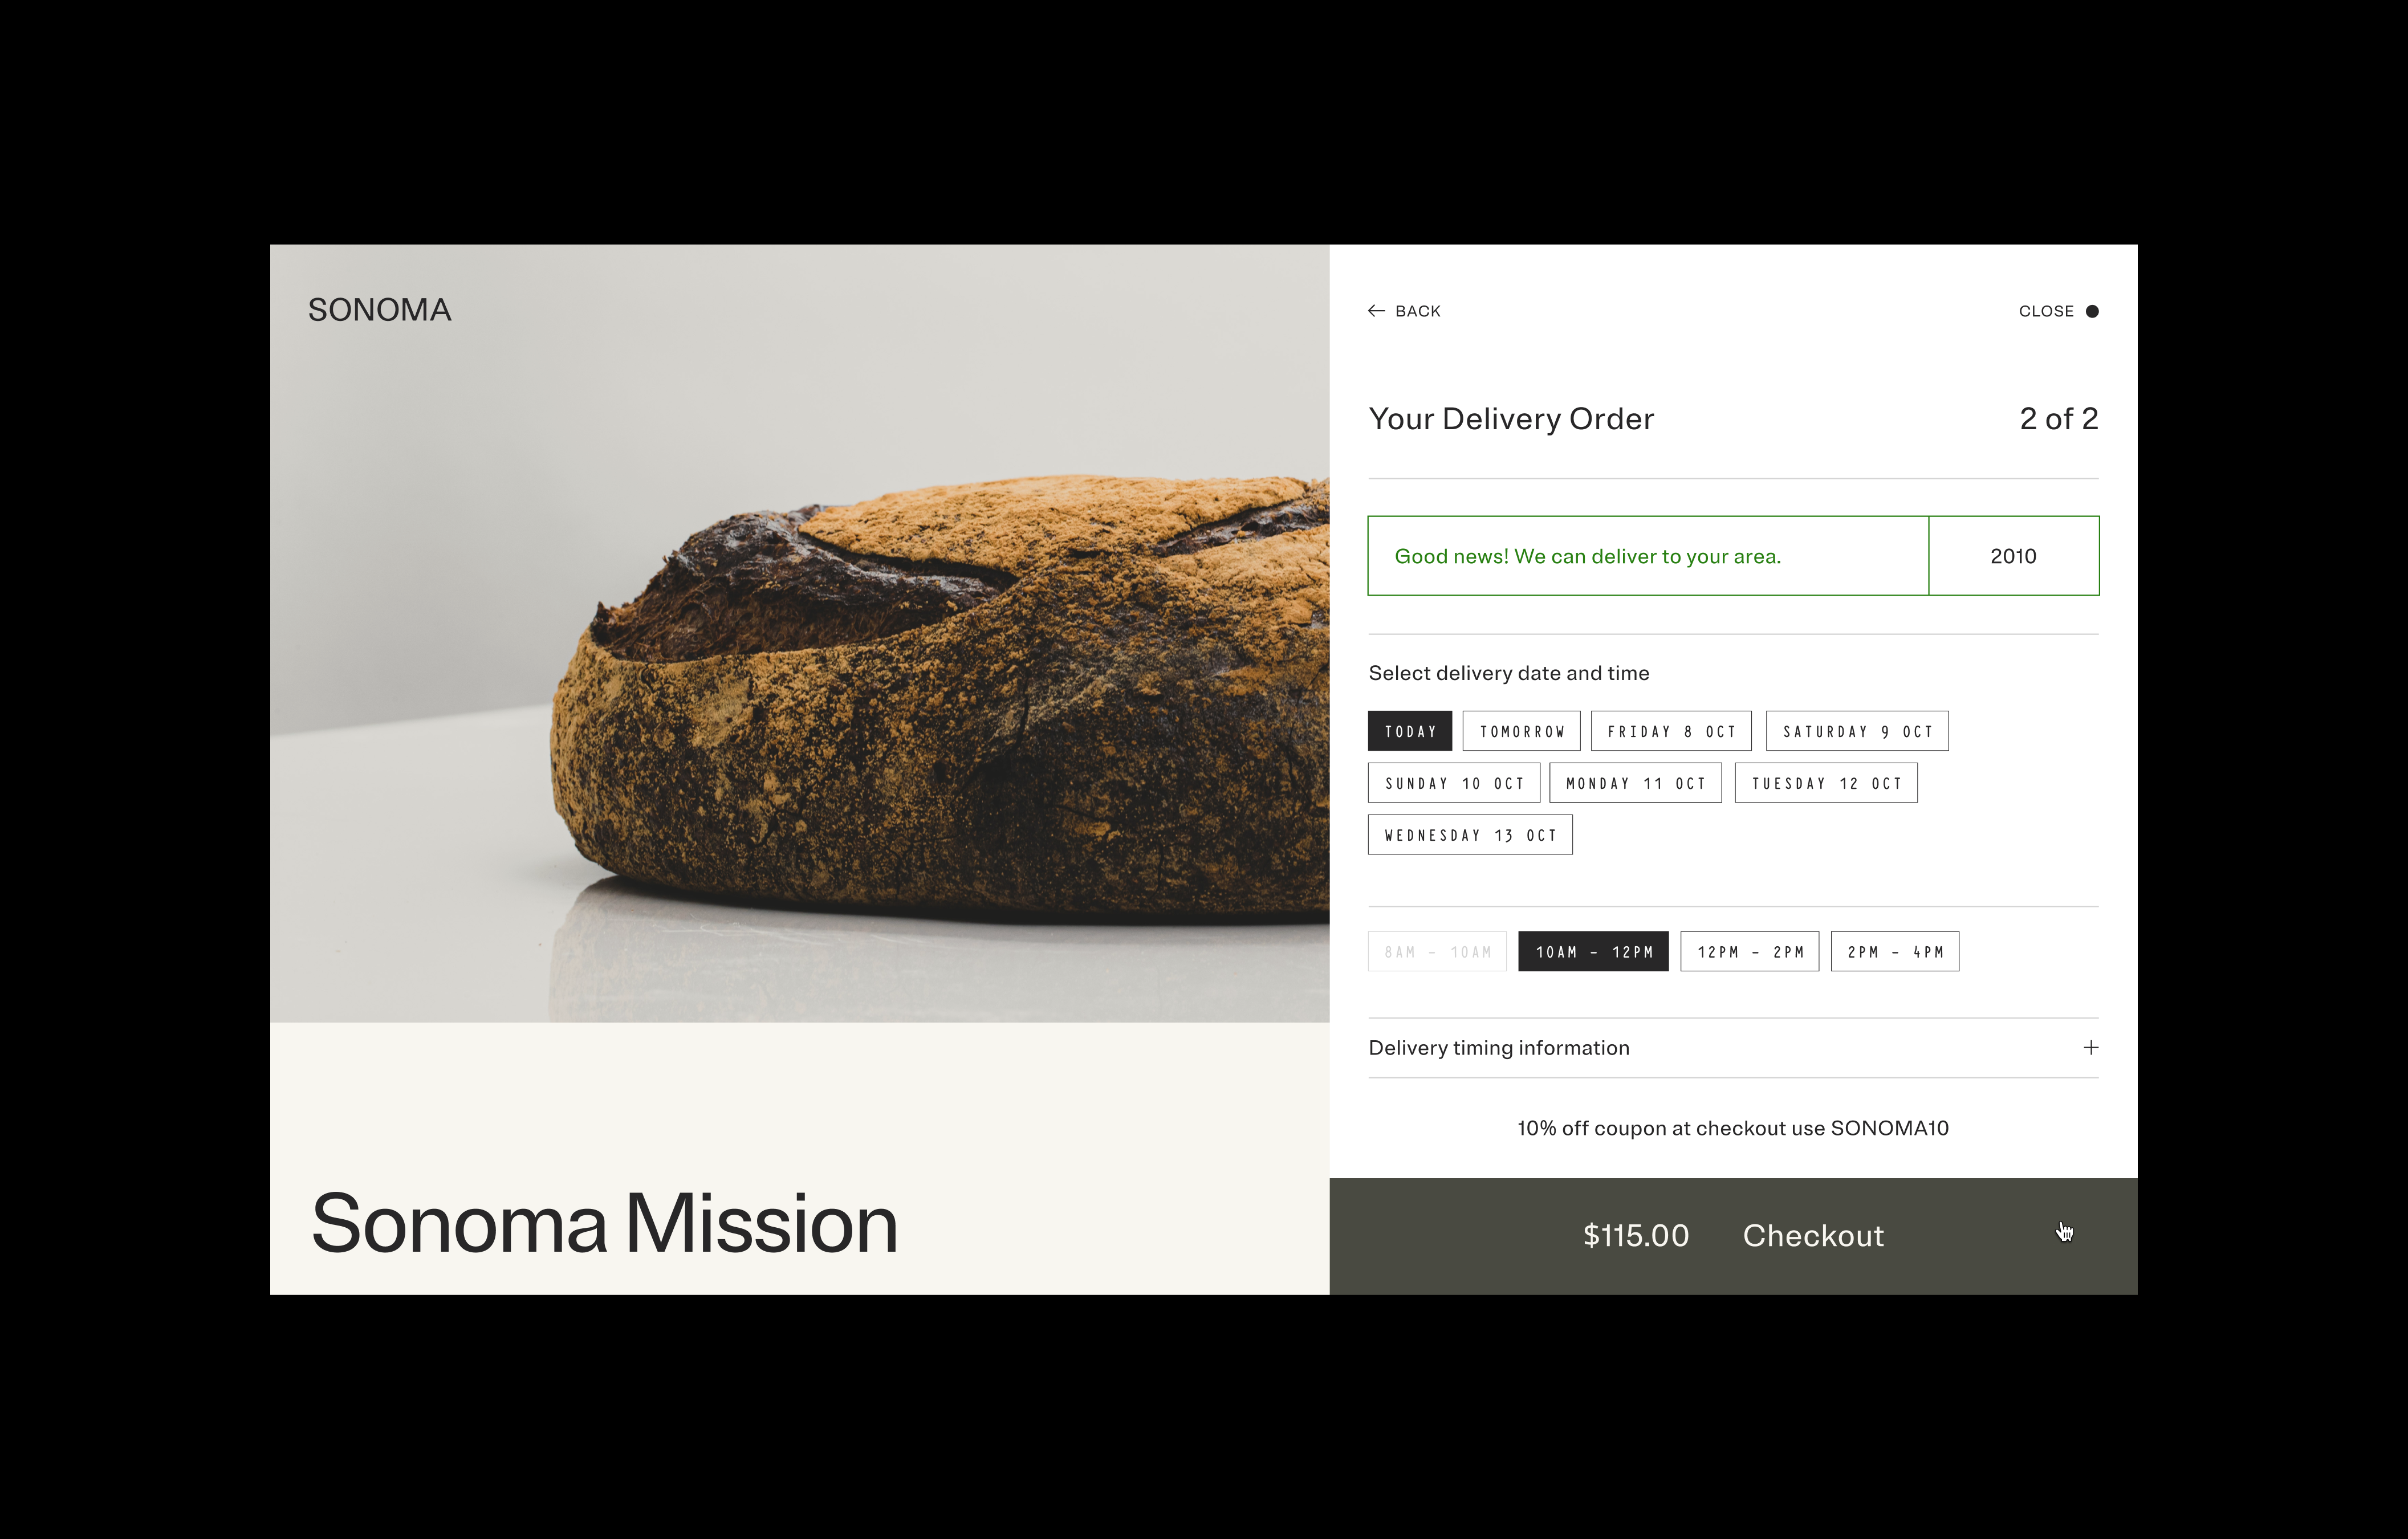 Sonoma website delivery order with delivery time selection